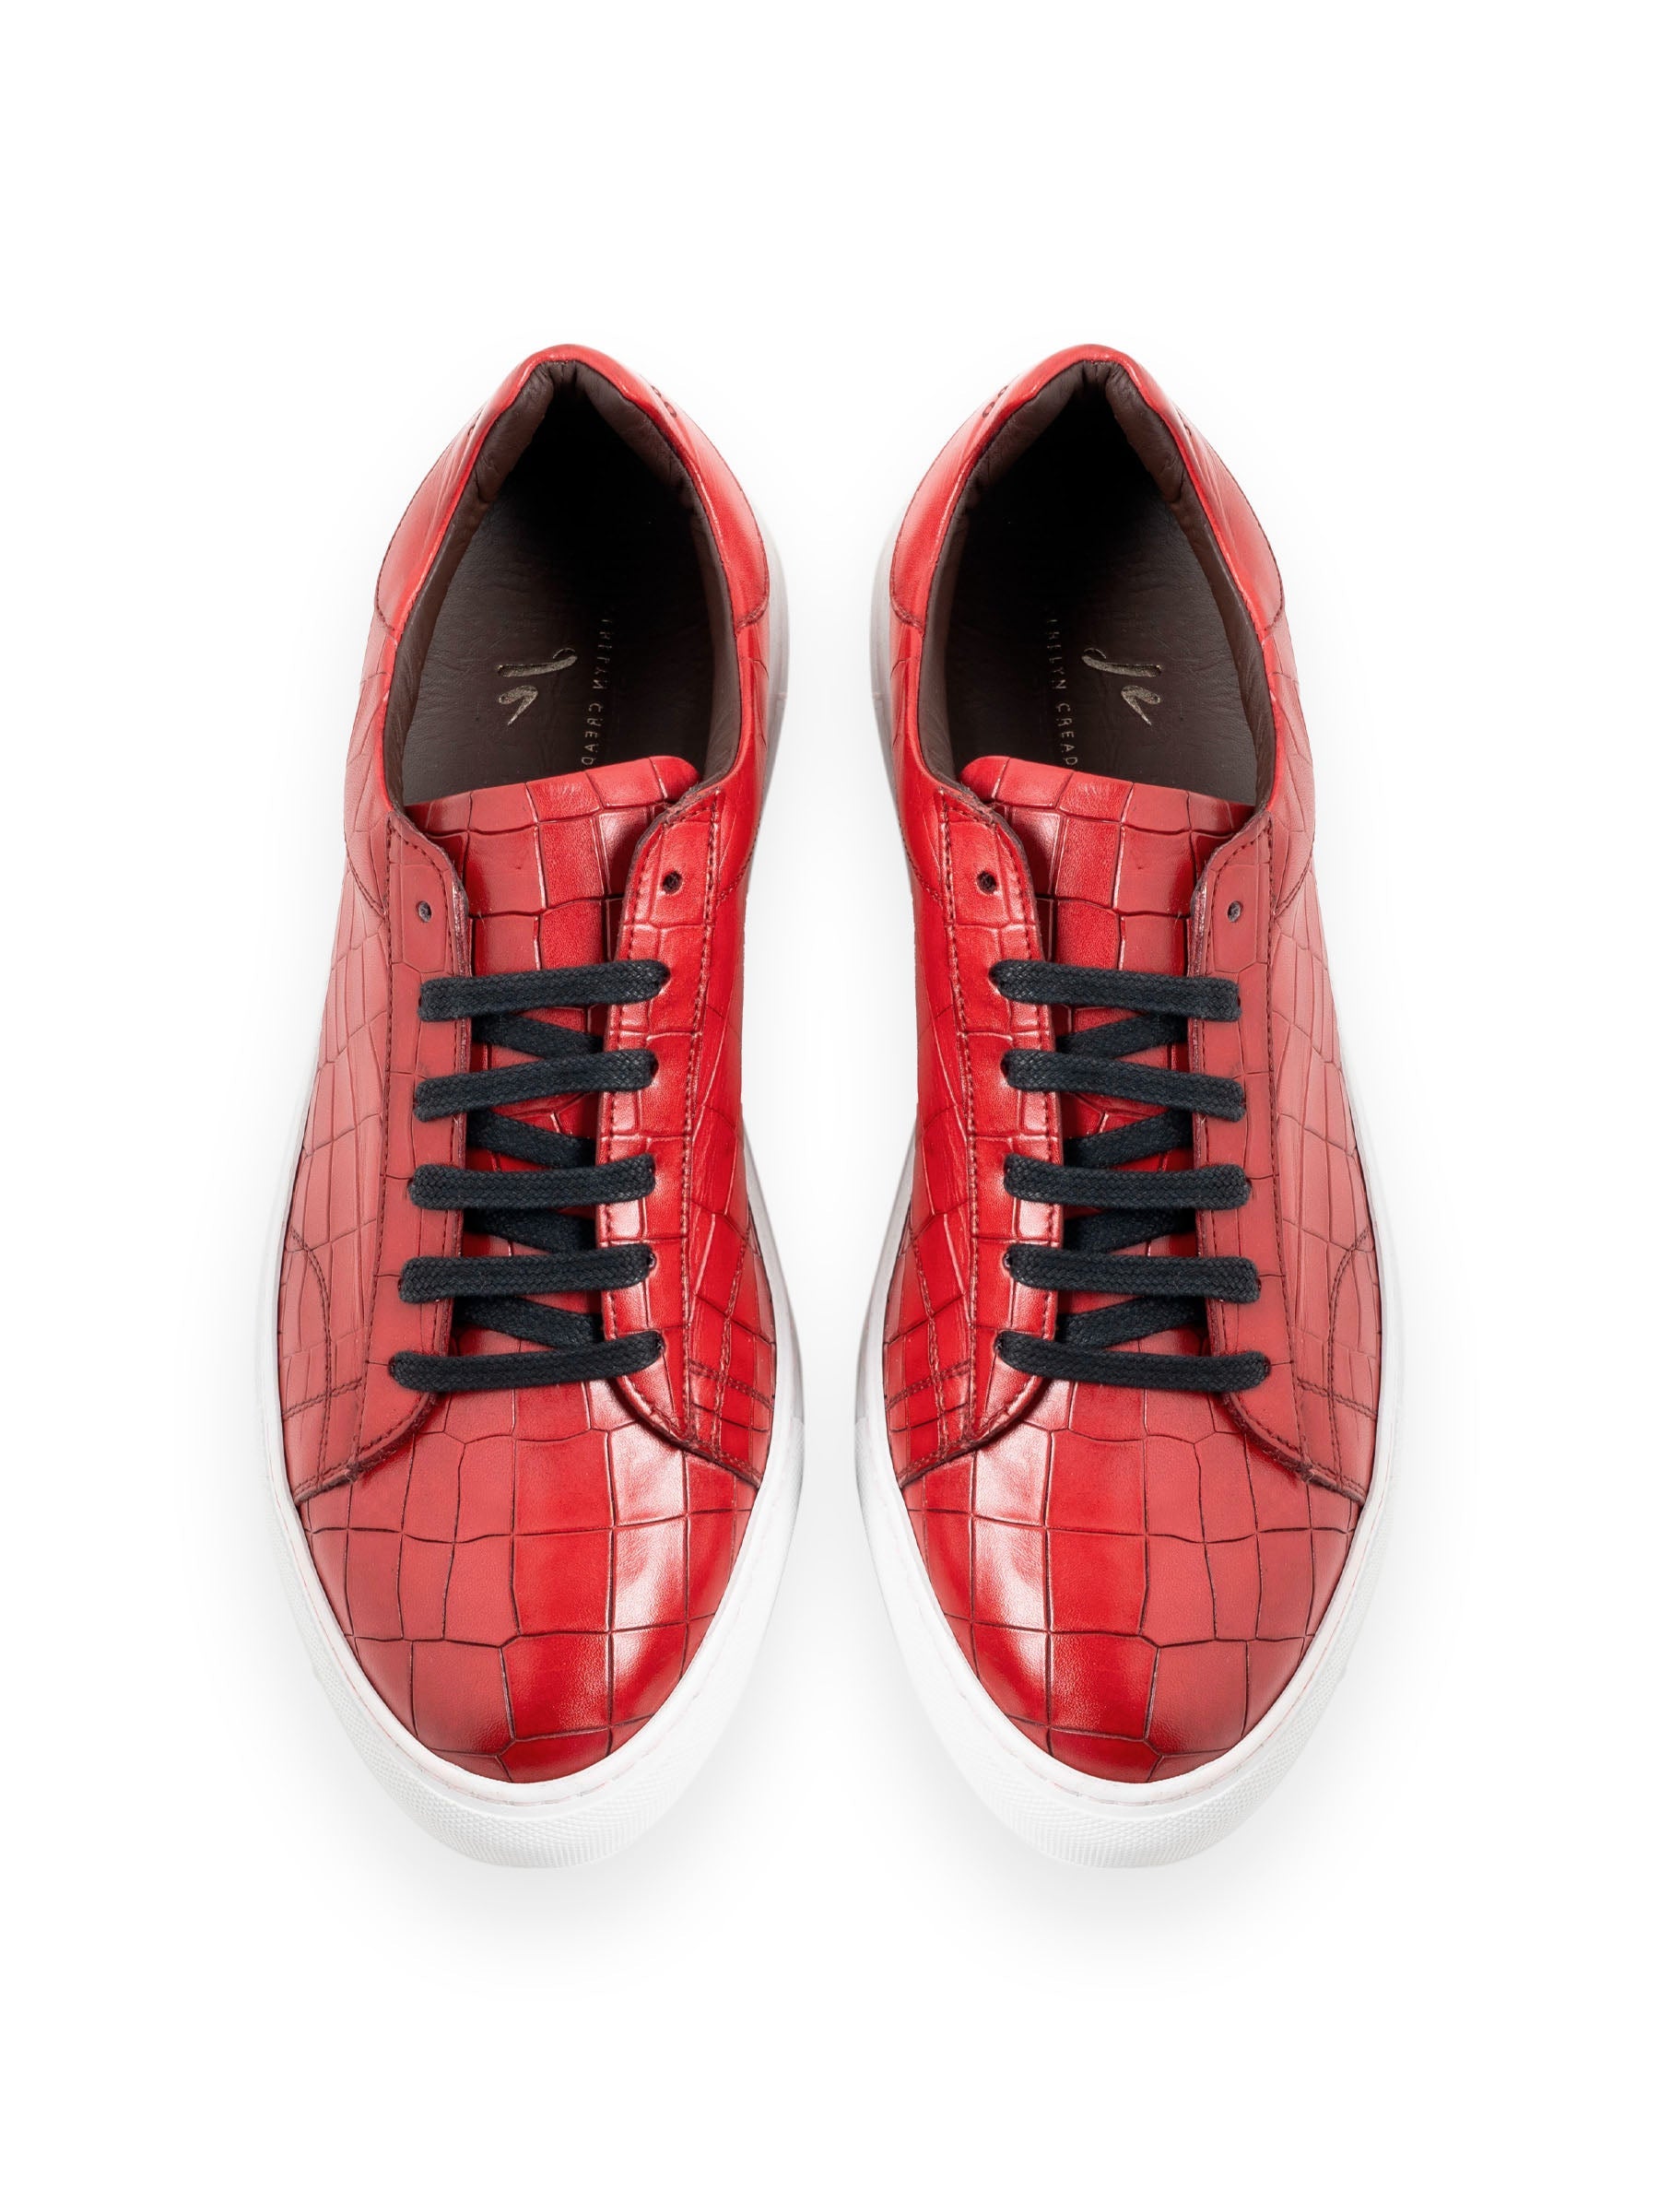 Chris Classic Printed Leather Sneaker by Jerelyn Creado